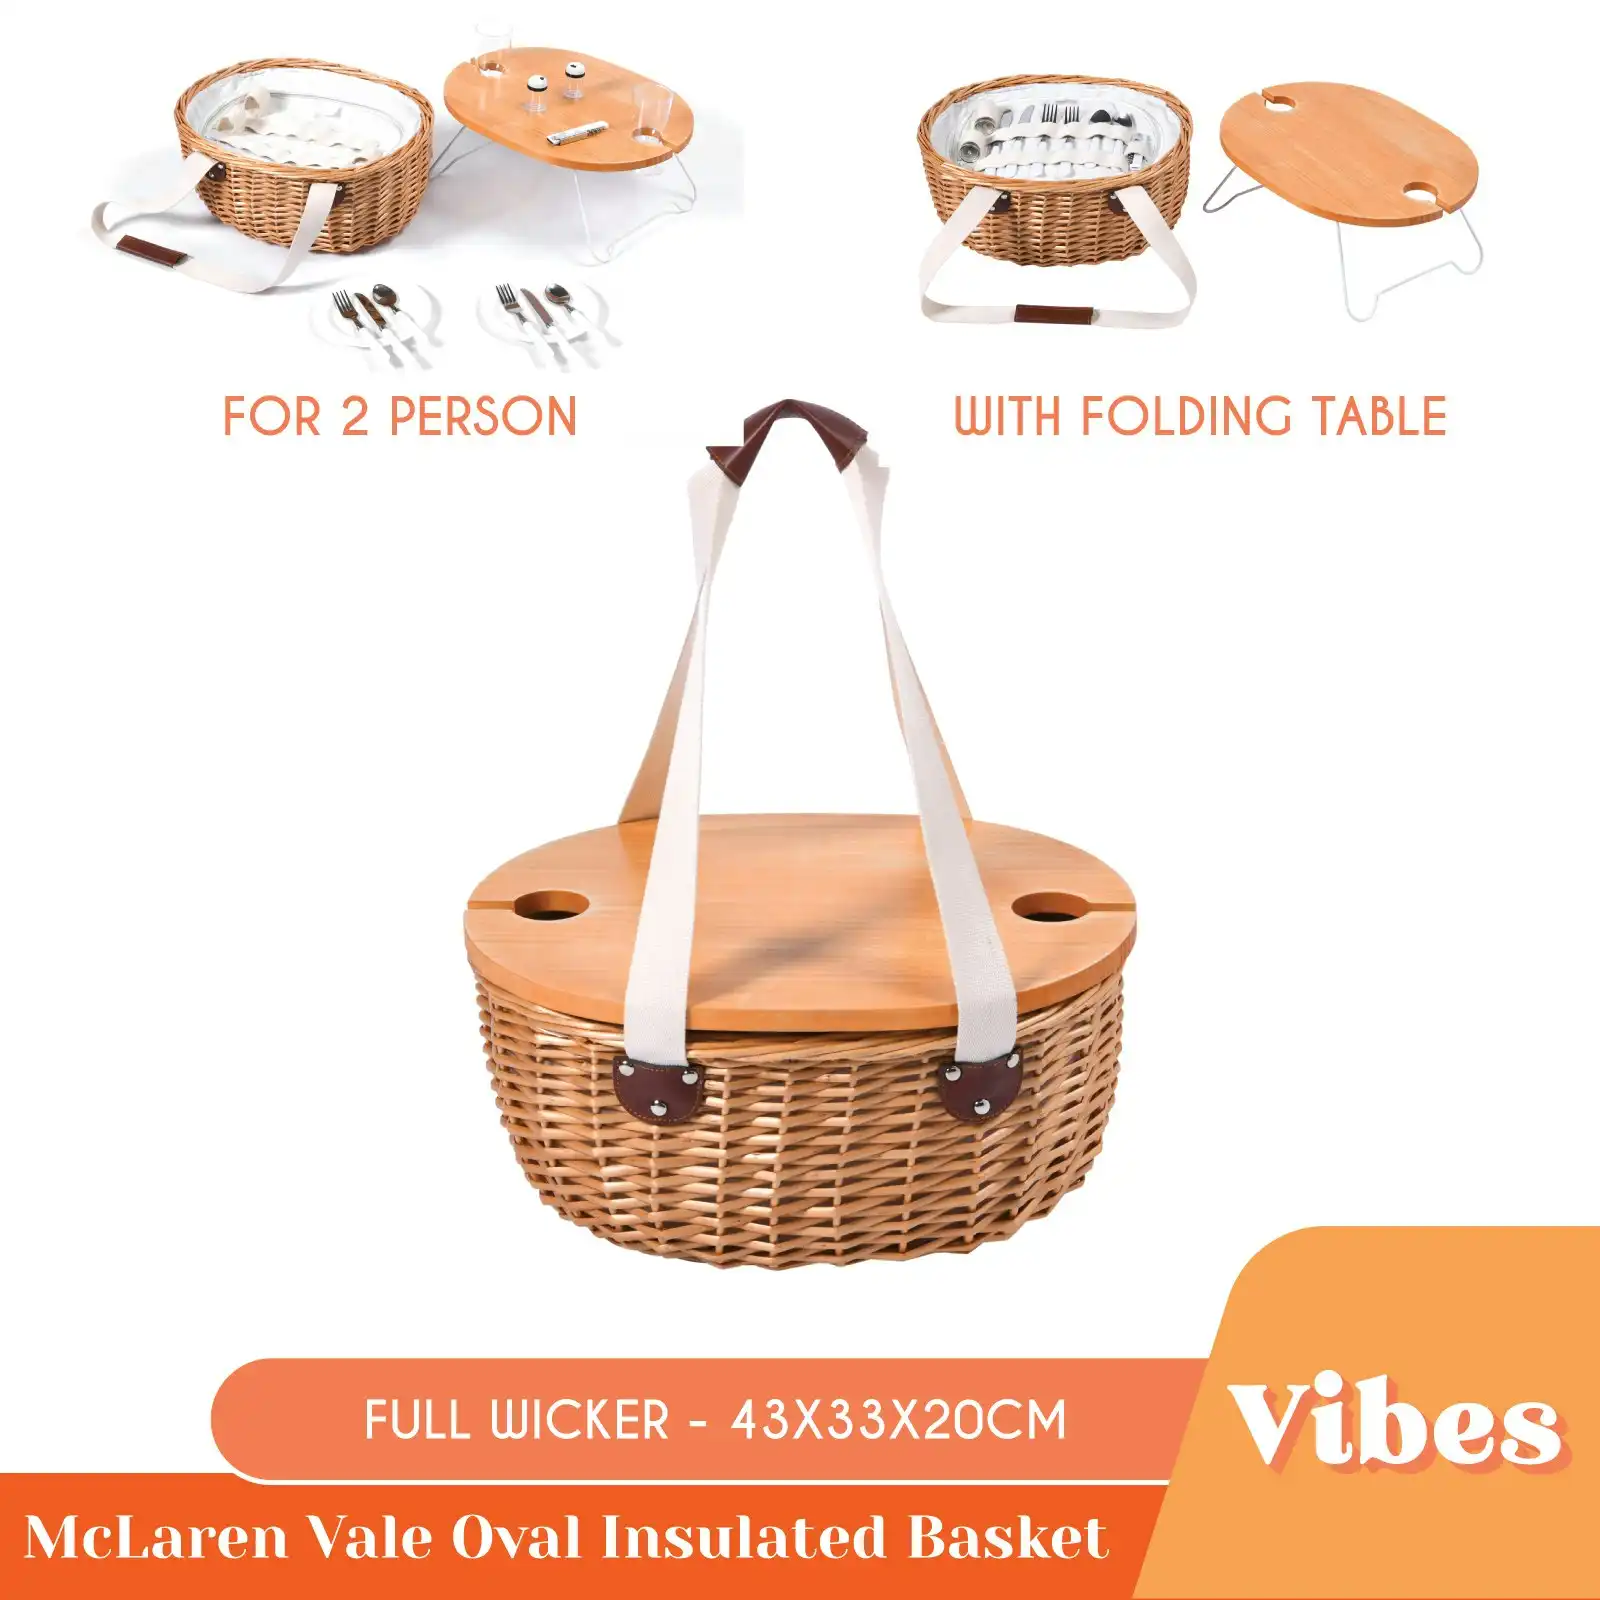 Vibes McLaren Vale 2 Person Oval Insulated Wicker Basket with Folding Table  Natural & Cream